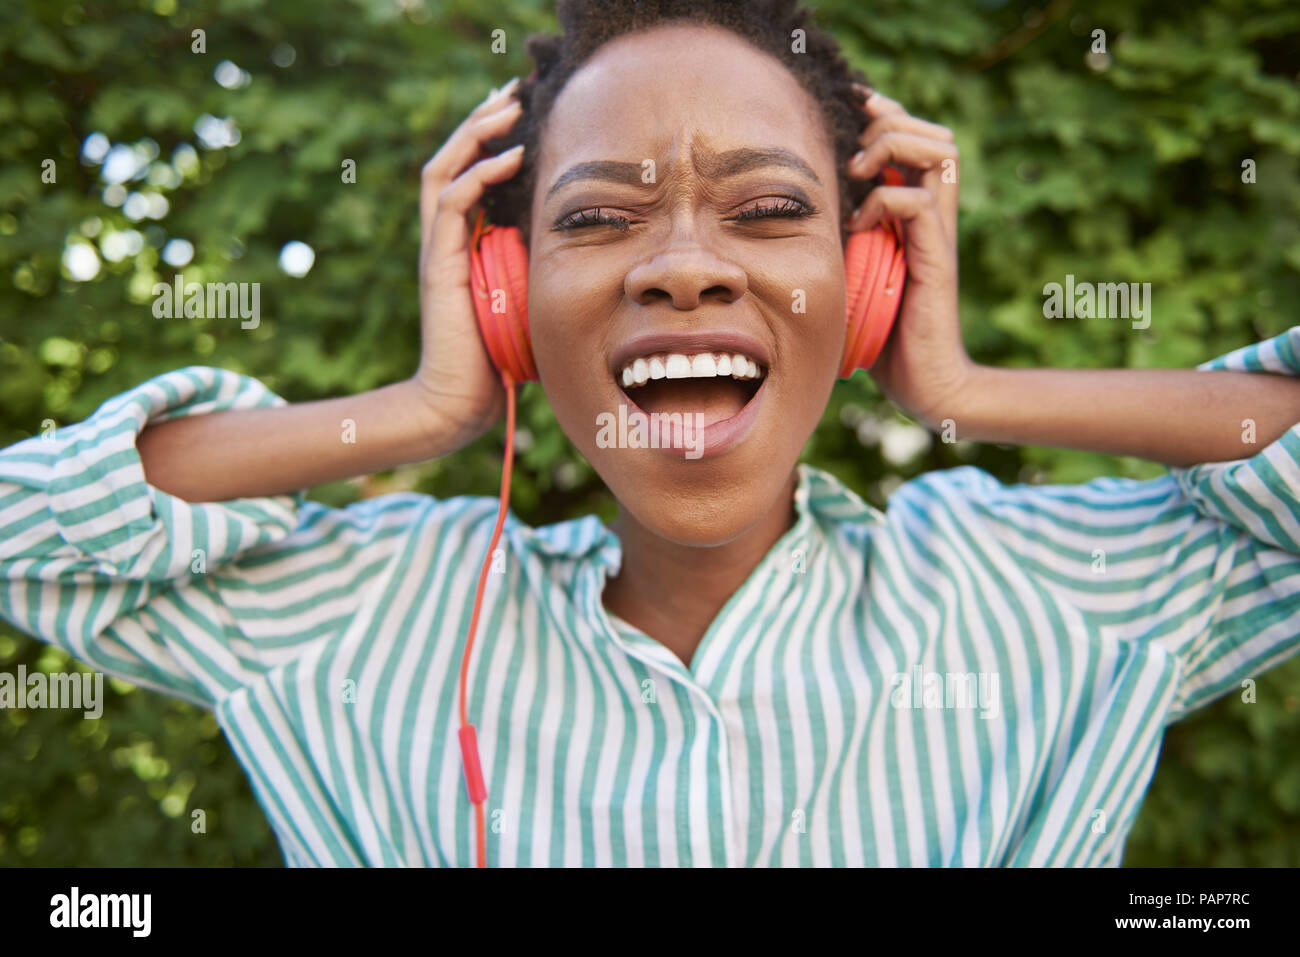 Portrait of singing young woman with headphones Stock Photo